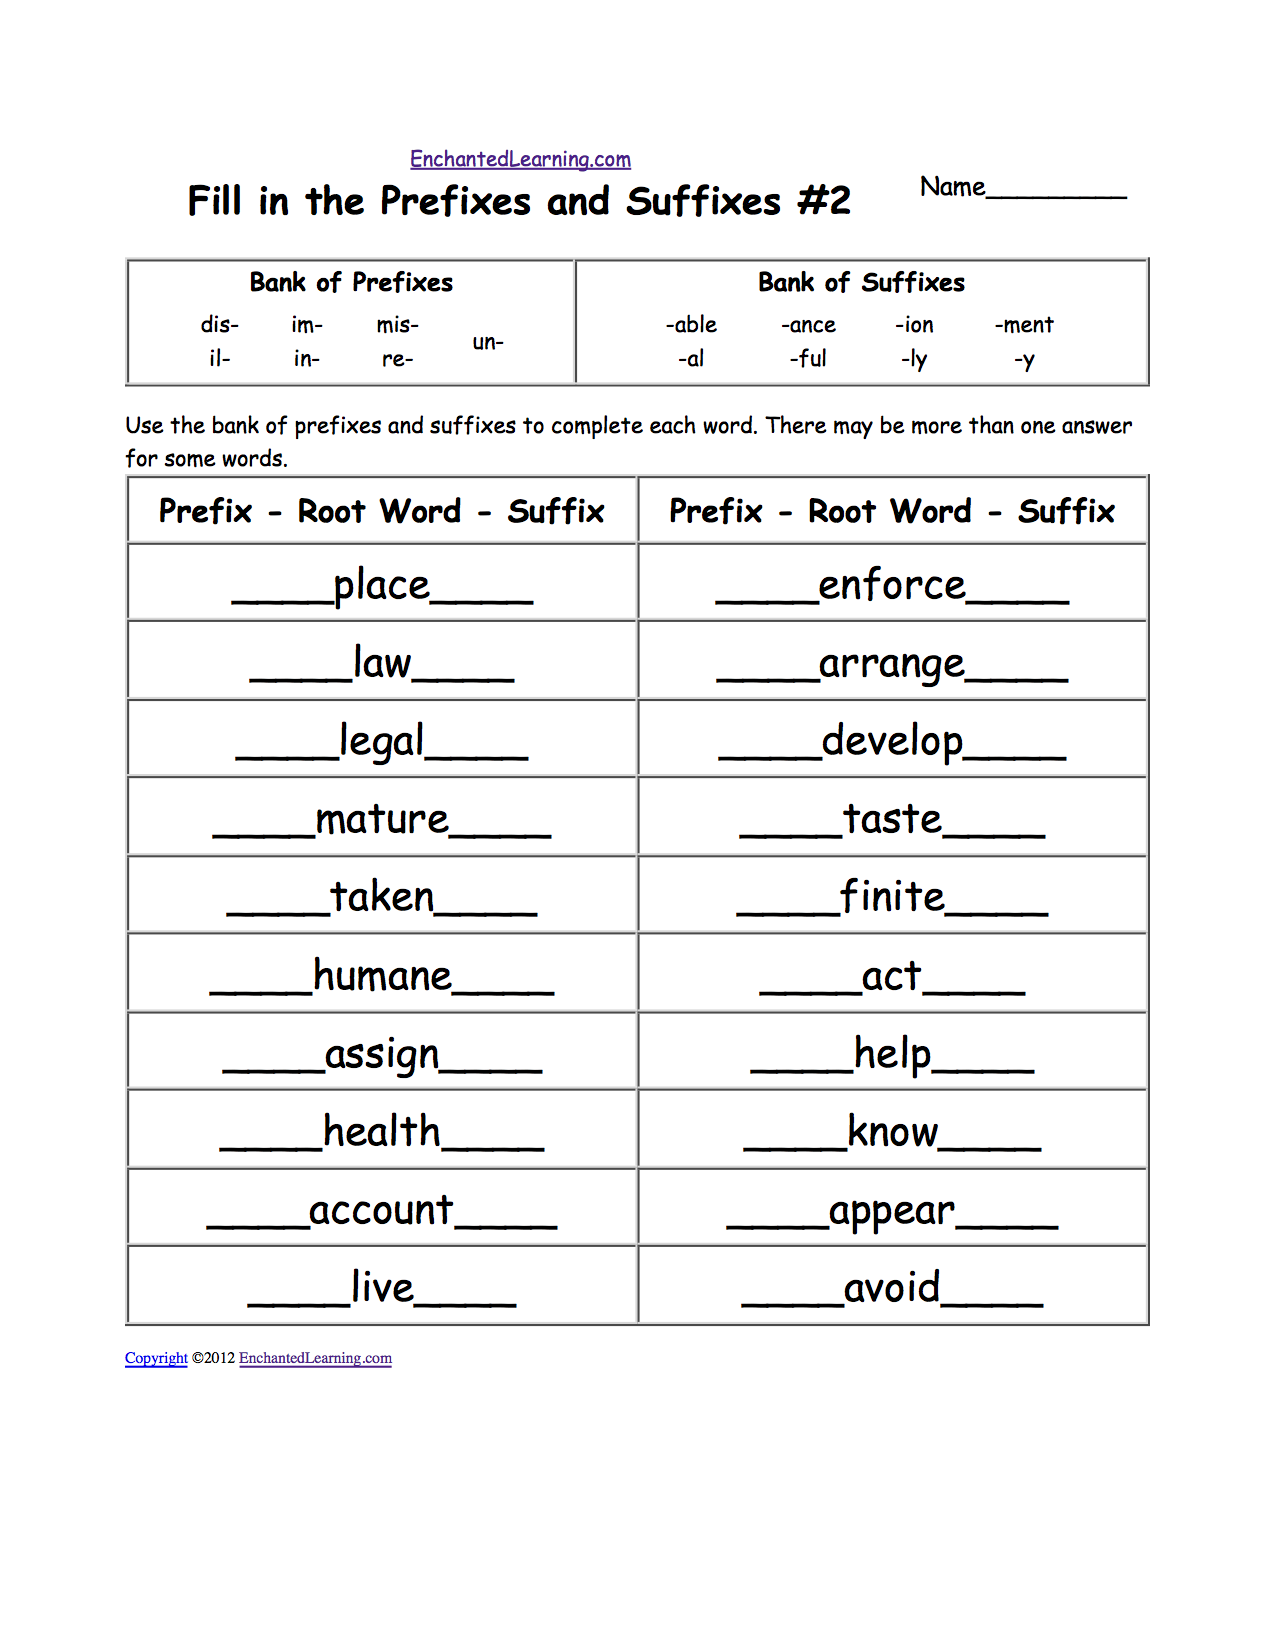 Prefixes And Suffixes Enchanted Learning